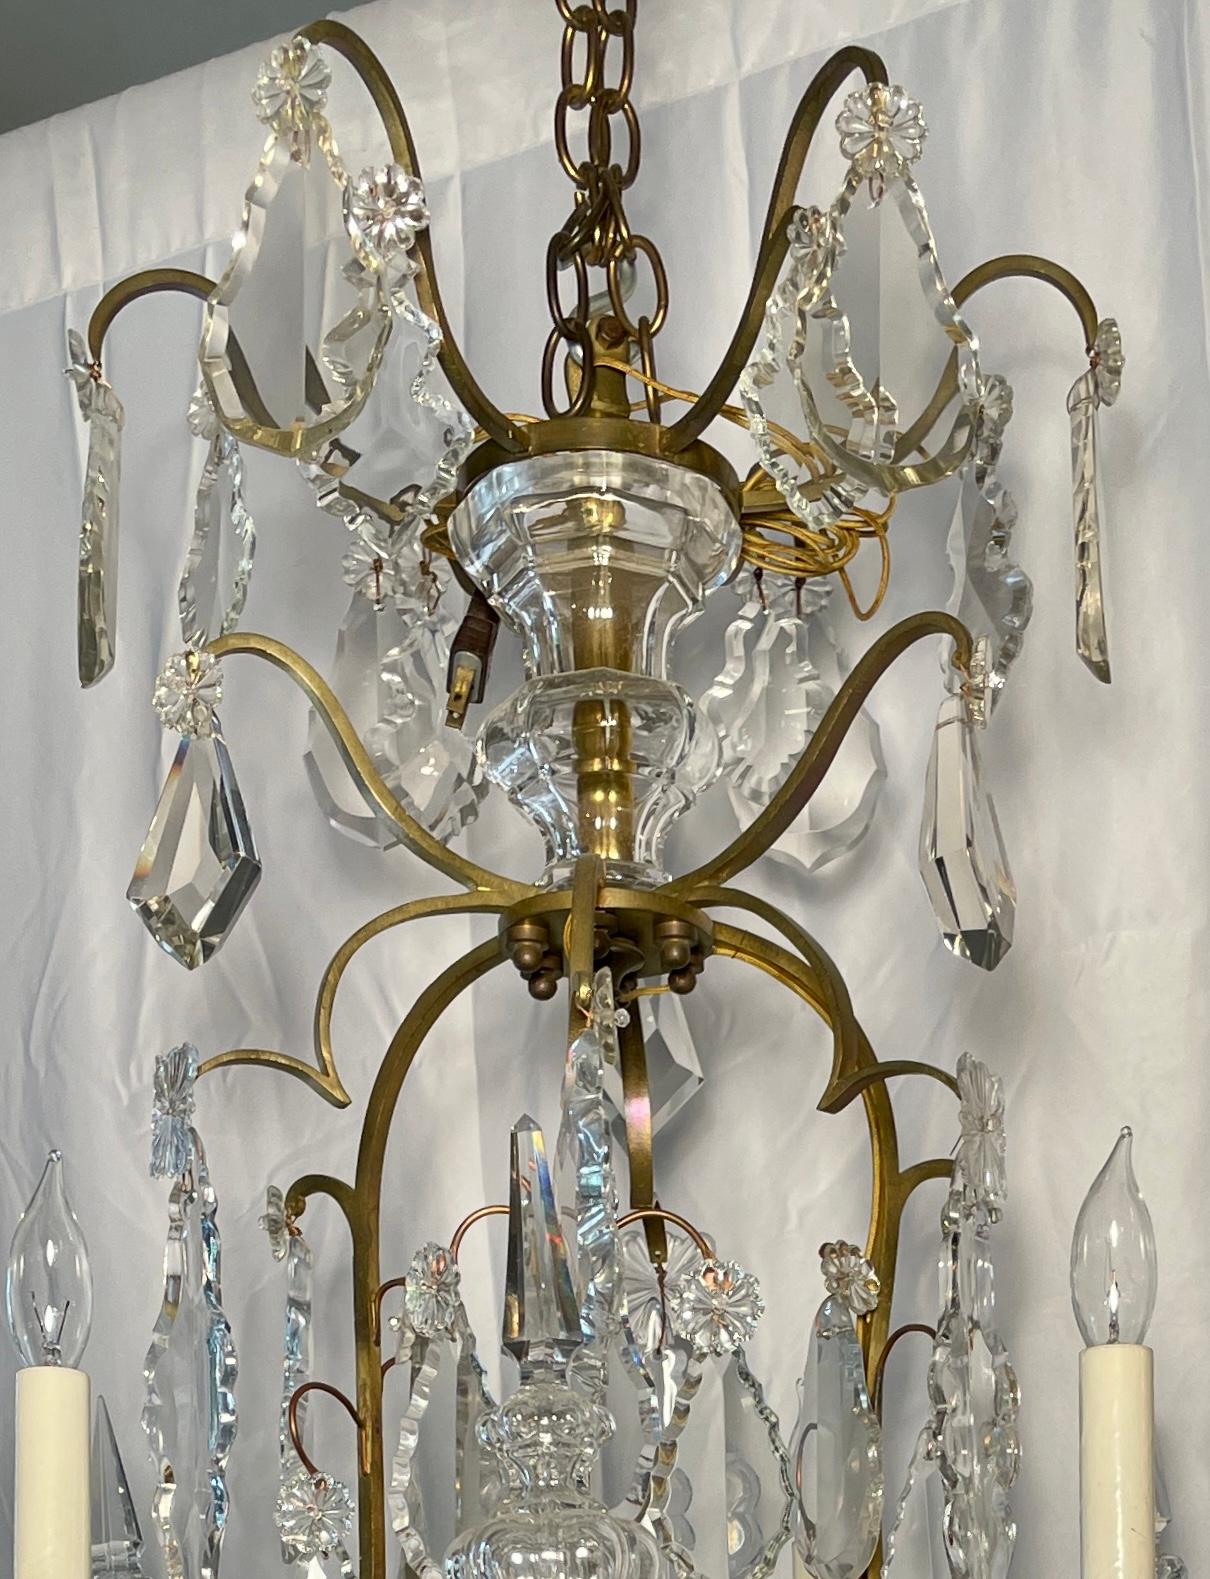 Antique French Baccarat crystal and bronze D' Ore chandelier, circa 1880-1890.
Beautiful open bronze work with large cut crystal prisms.